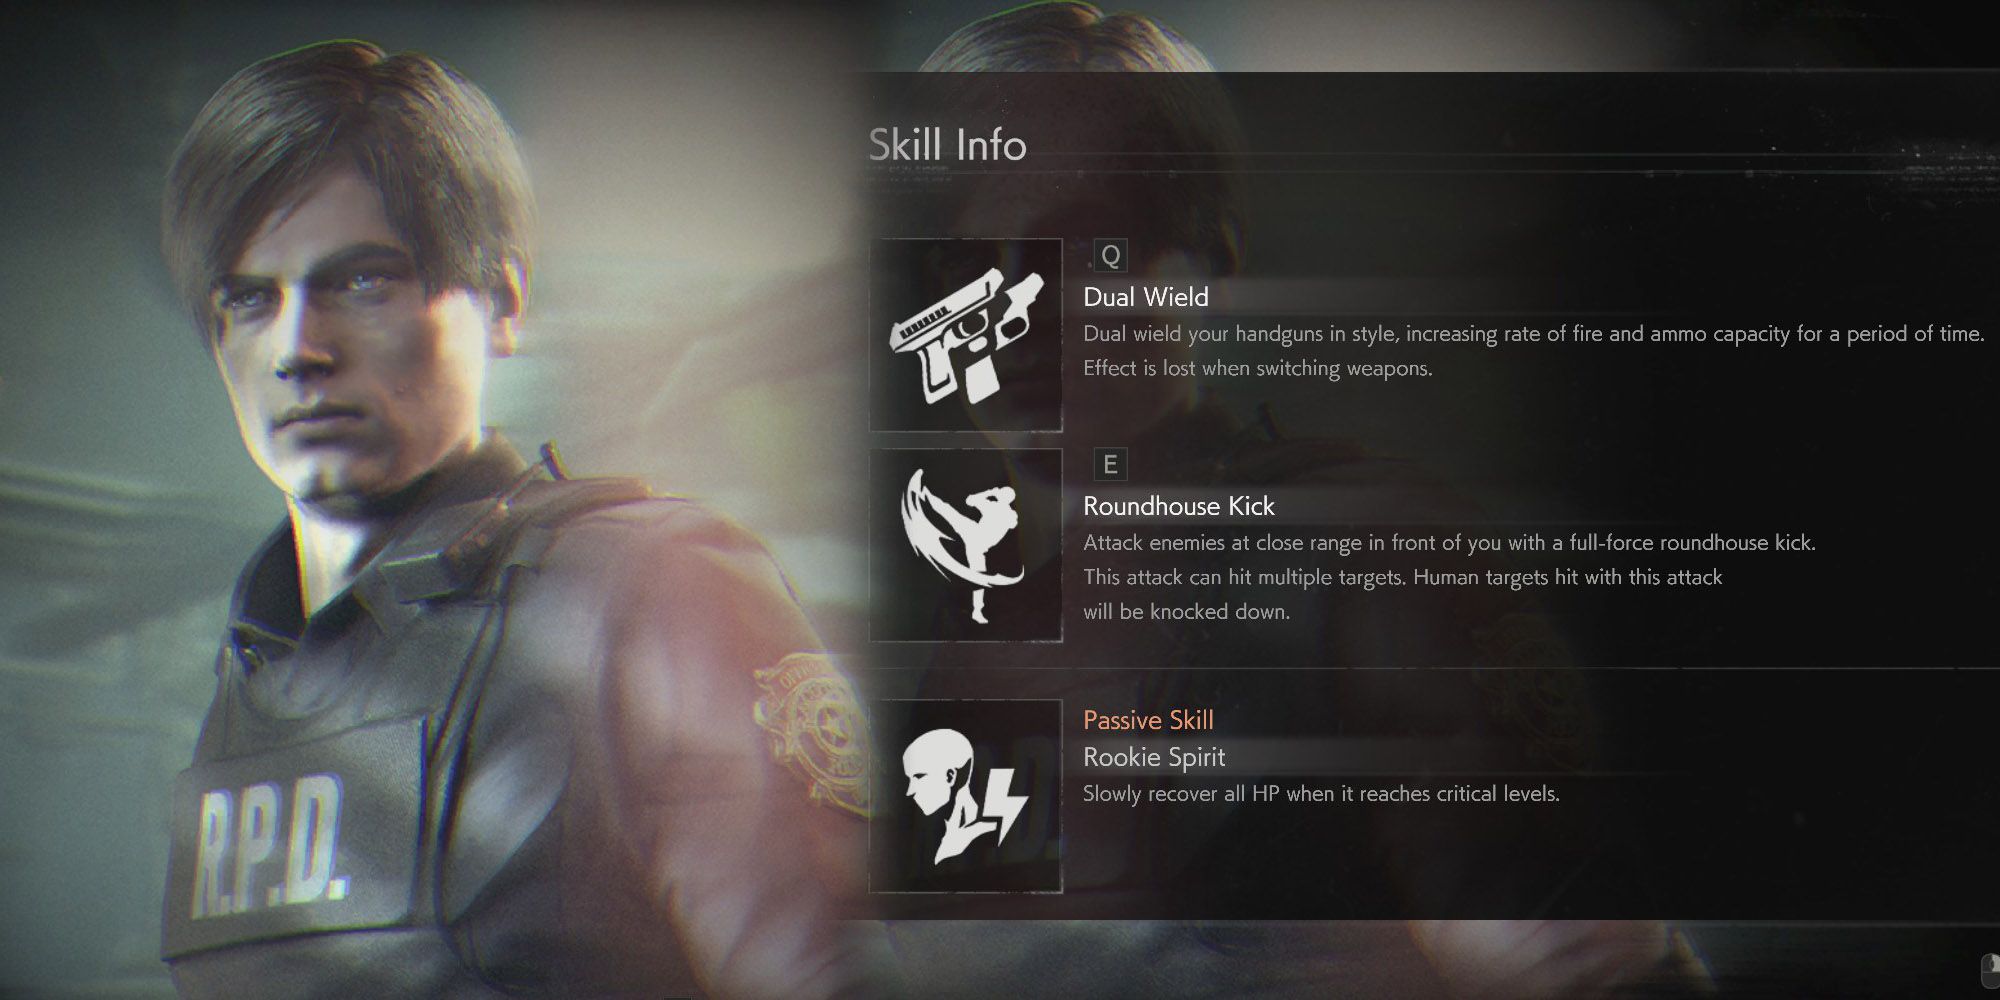 Resident Evil ReVerse - Leon Kennedy In-Game Next To Skill Descriptions